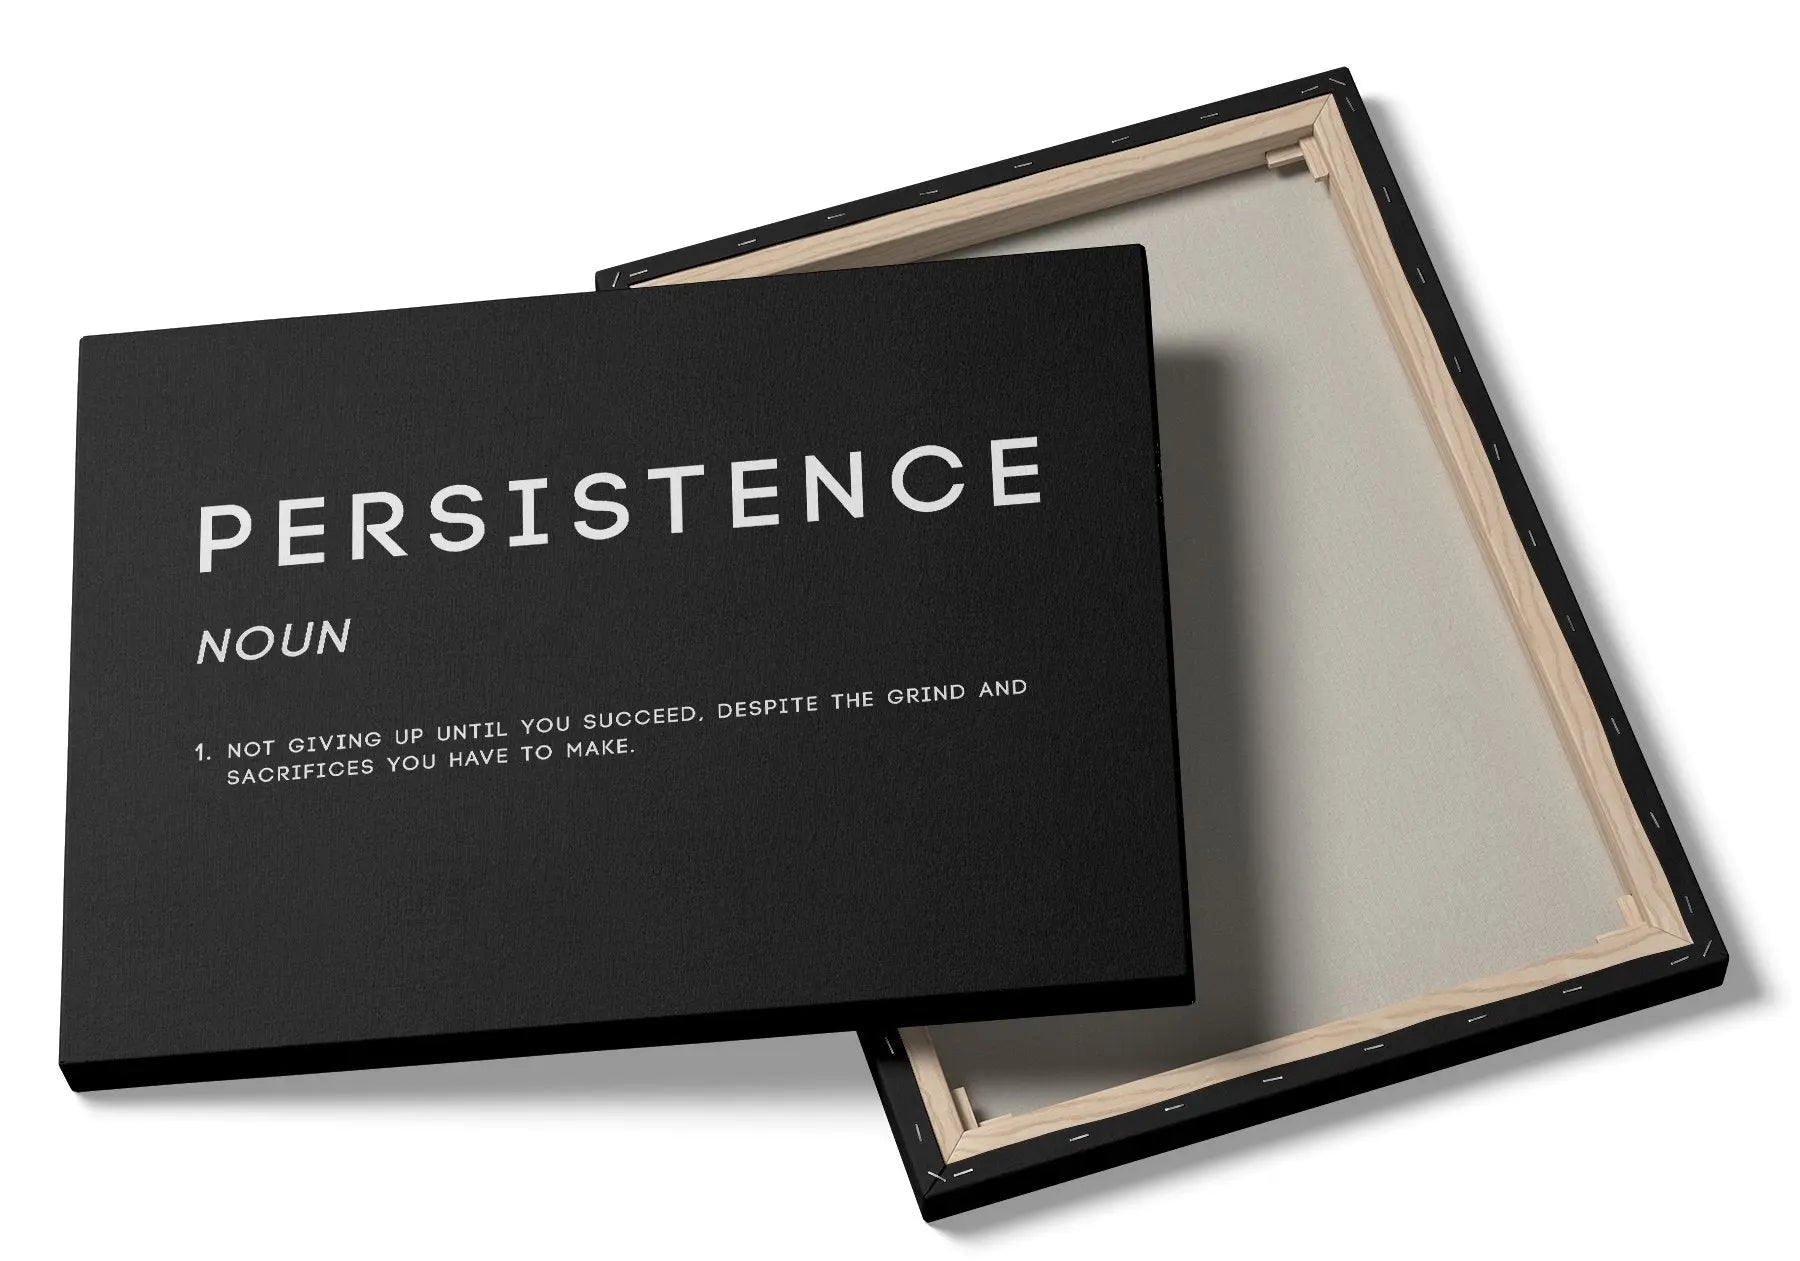 "PERSISTENCE" - Art For Everyone